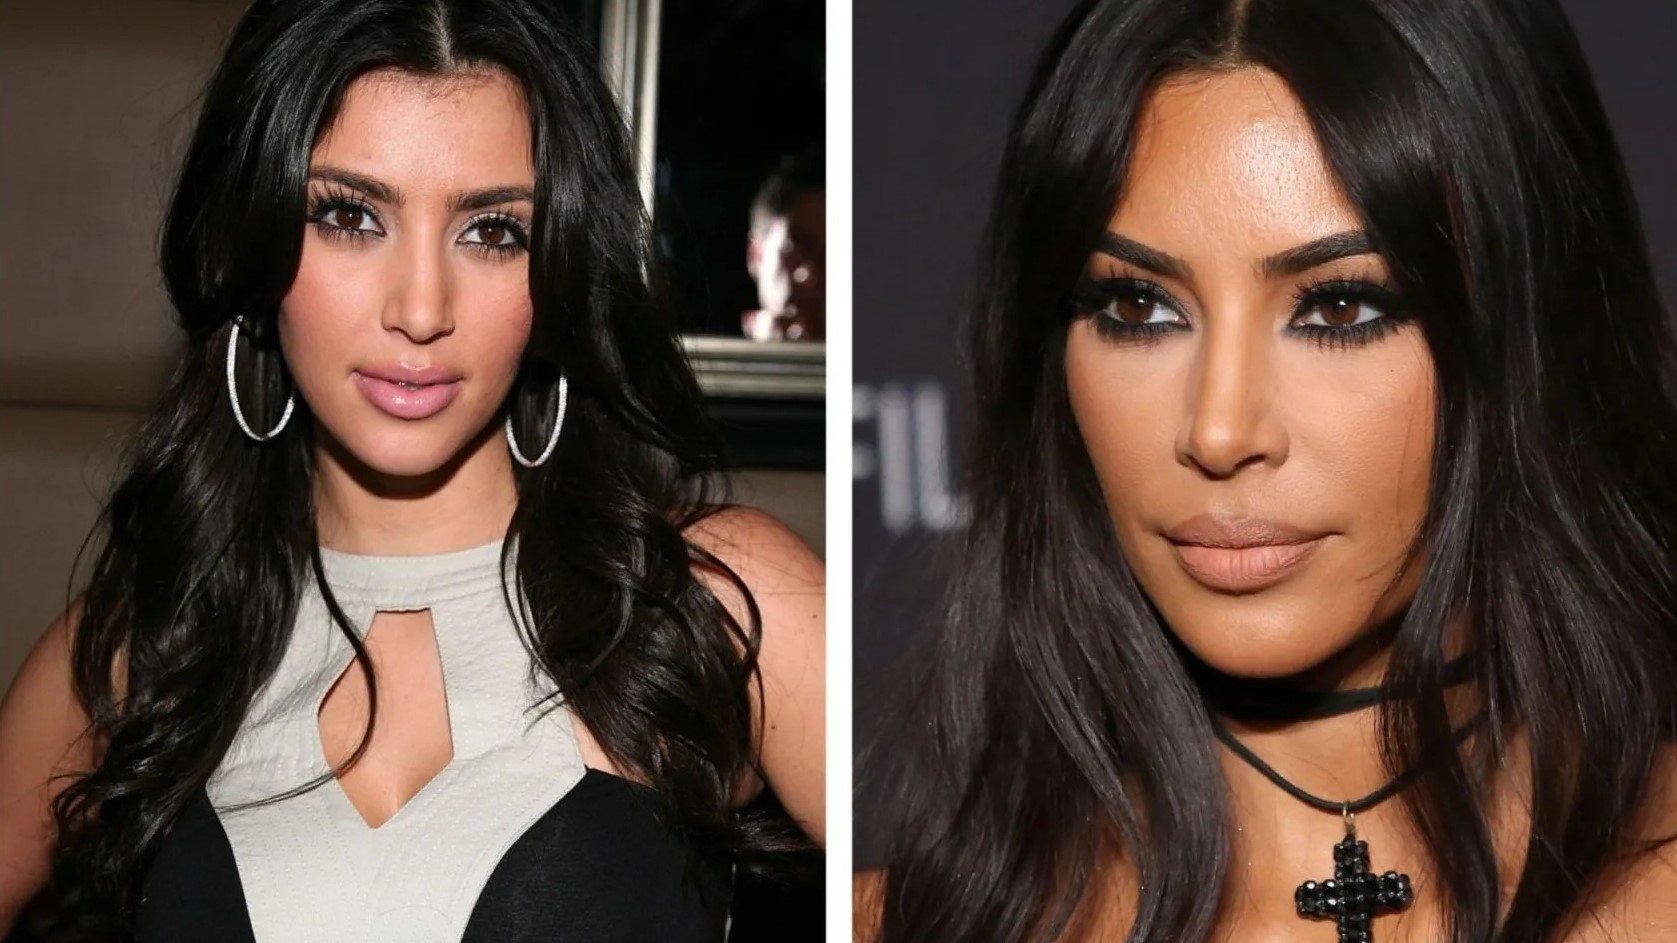 Kim Kardashian's Real-Life Appearance: A Closer Look At Her Physical Features